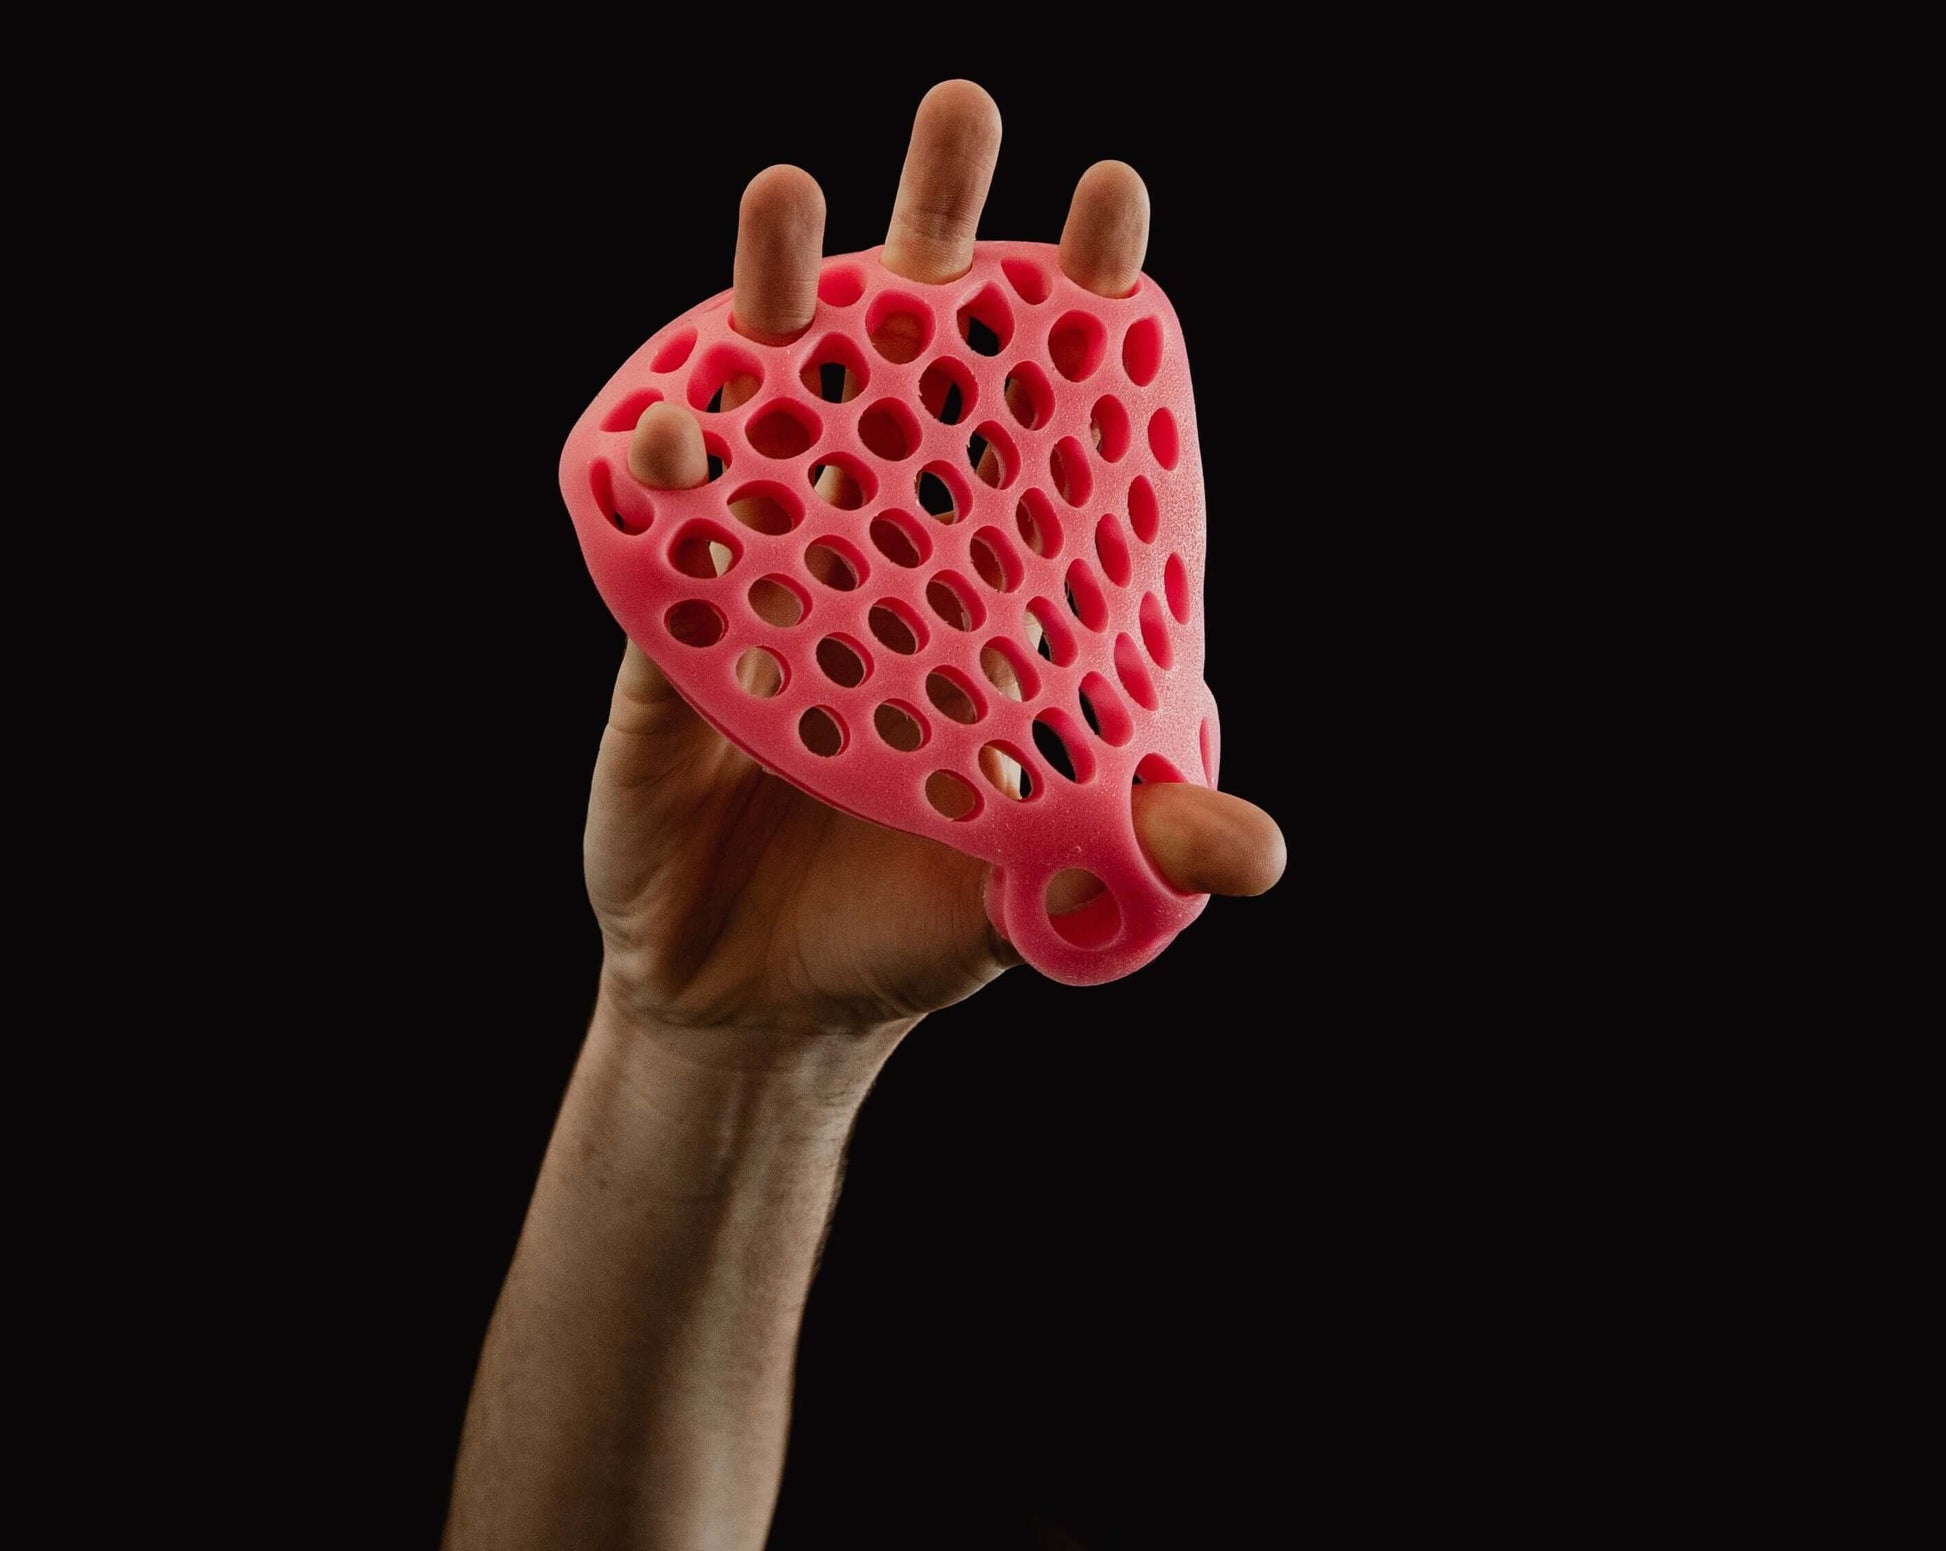 Pink Hand Grip Strengthener - Unlimited Variations Finger Exerciser and Finger Stretcher - Grip Strength Trainer for Hand Therapy, Rock Climbing - Relieve Pain for Arthritis, Carpal Tunnel